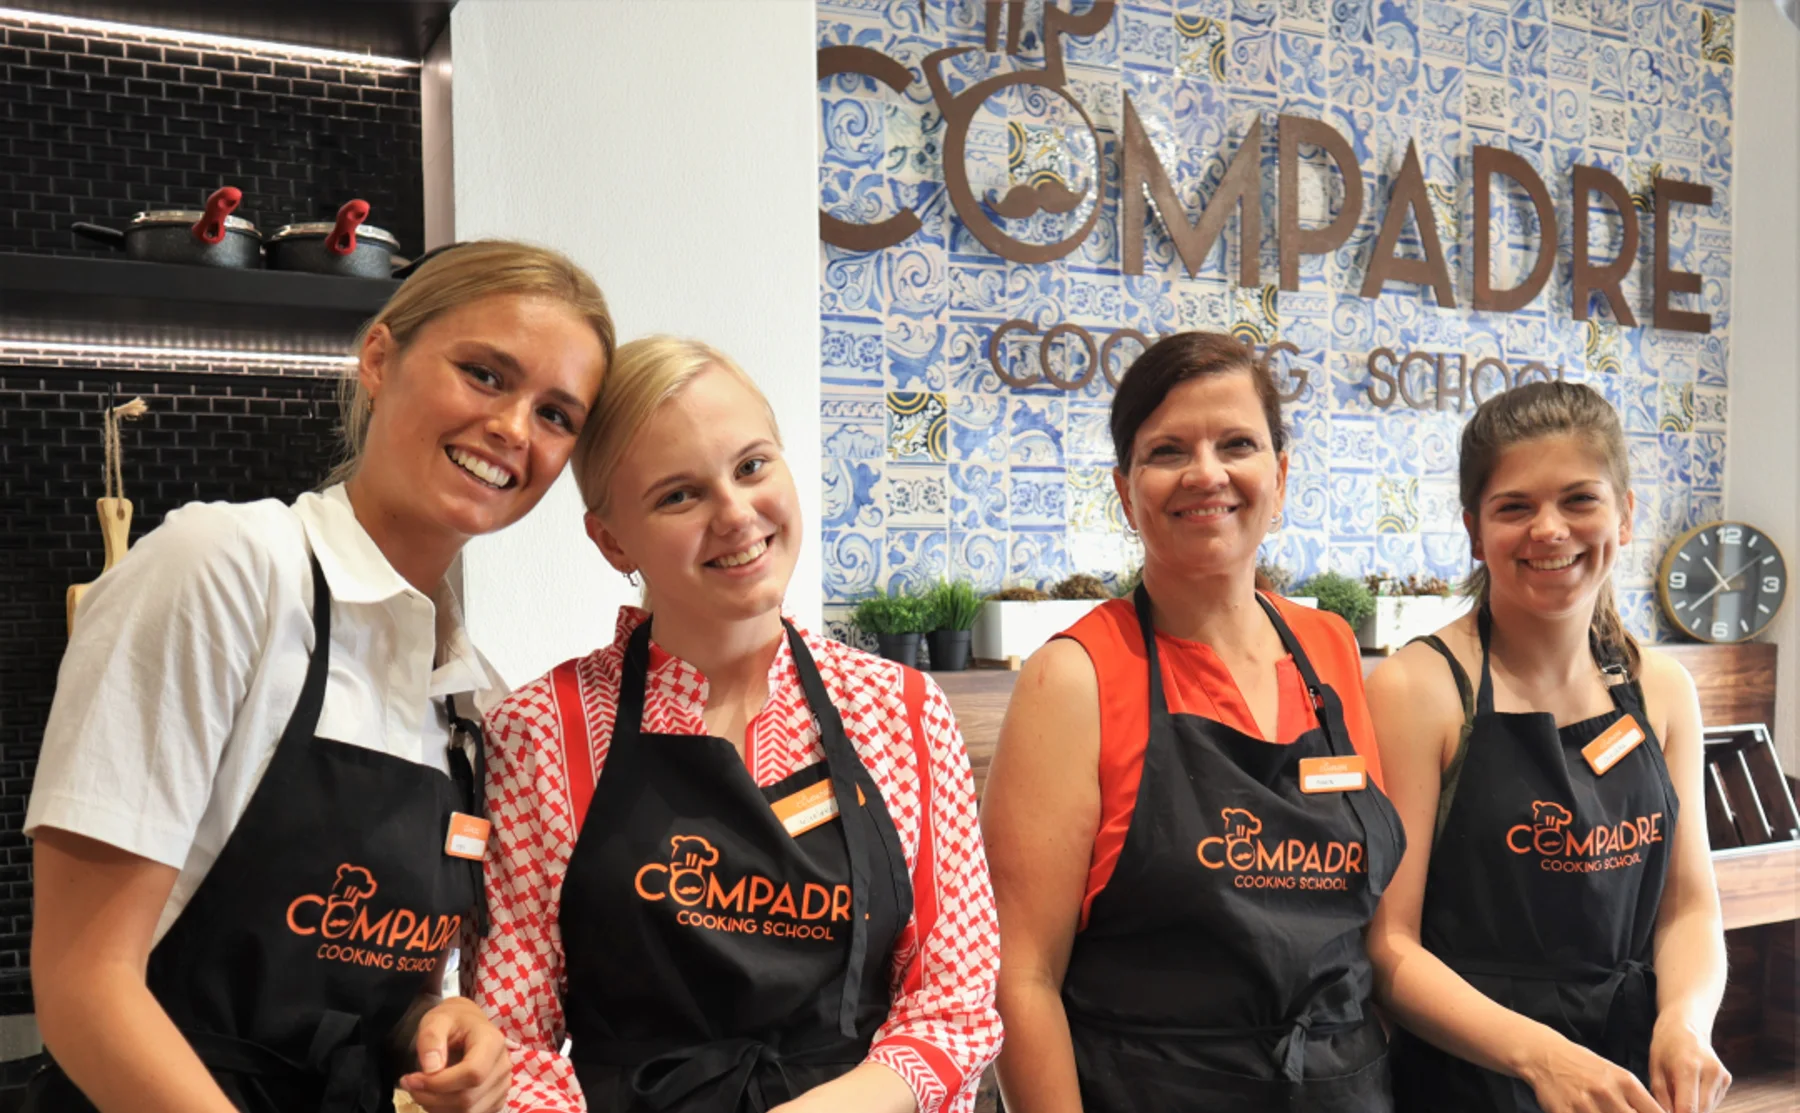 Portuguese cooking class for "dummies"! - 1369722